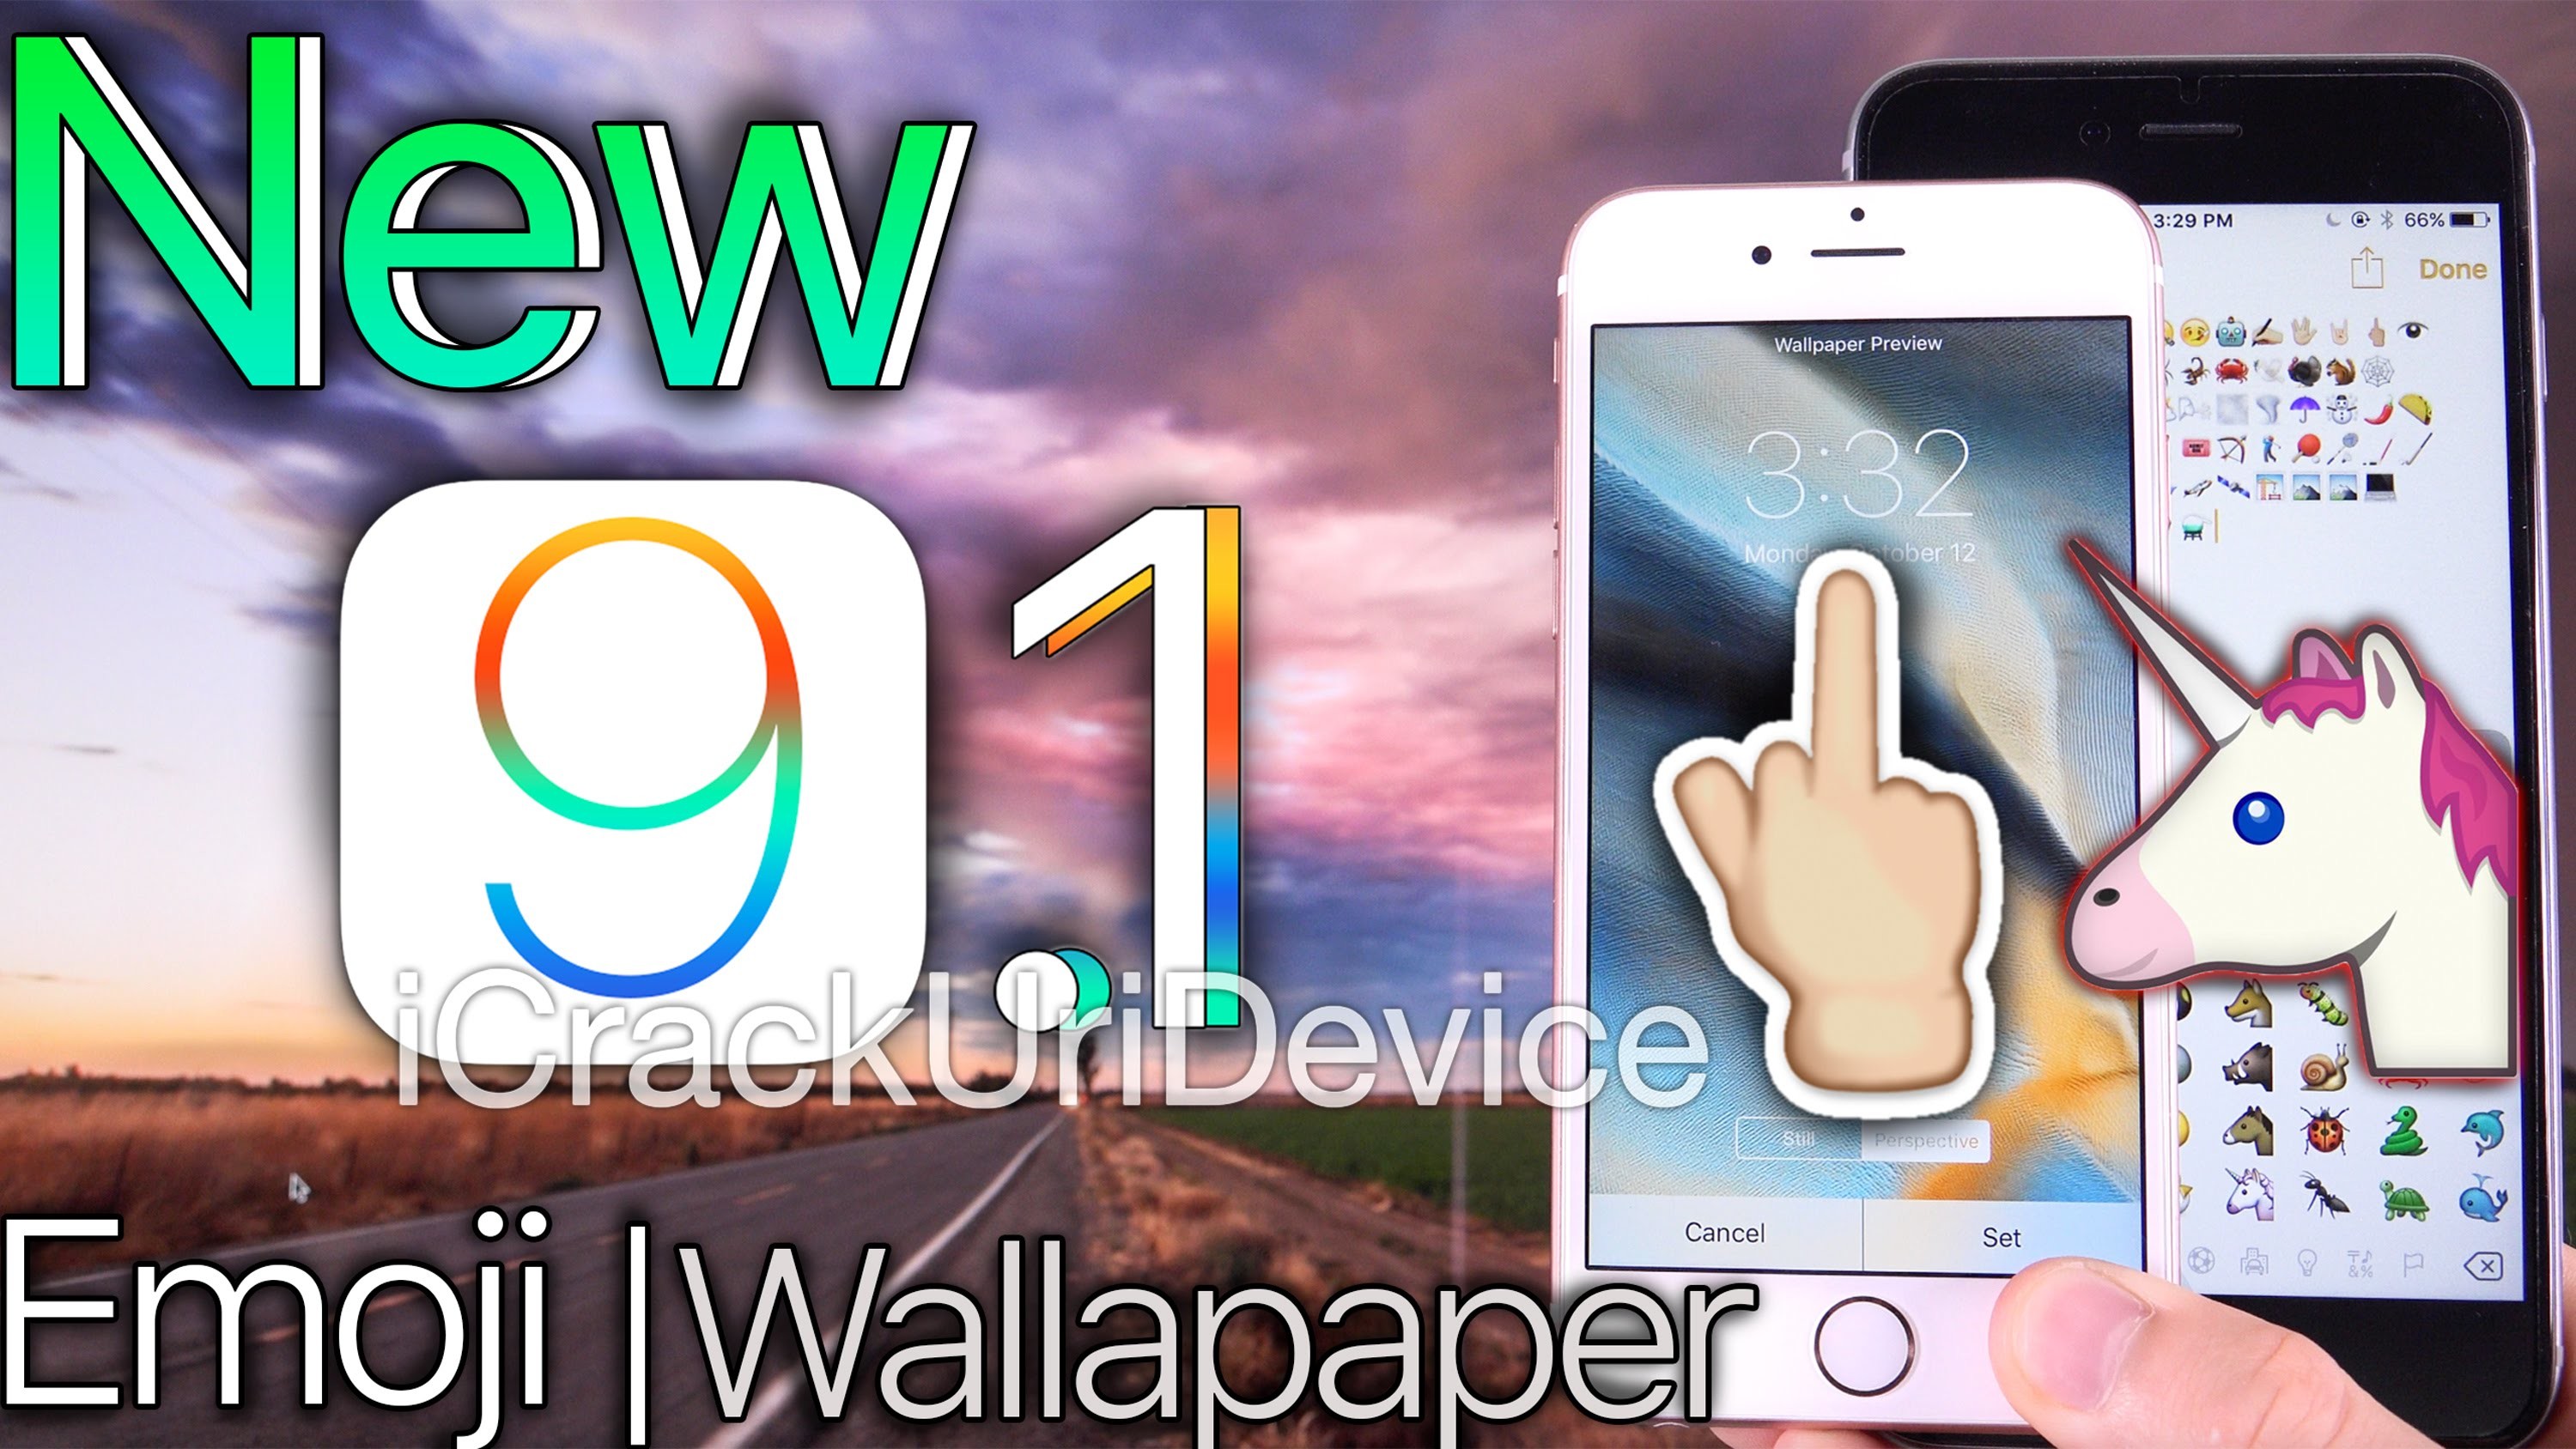 3000x1688 iOS 9.1 Beta 5 & Jailbreak Update: How to Install NEW Emojis, Wallpapers &  Features Review! - YouTube